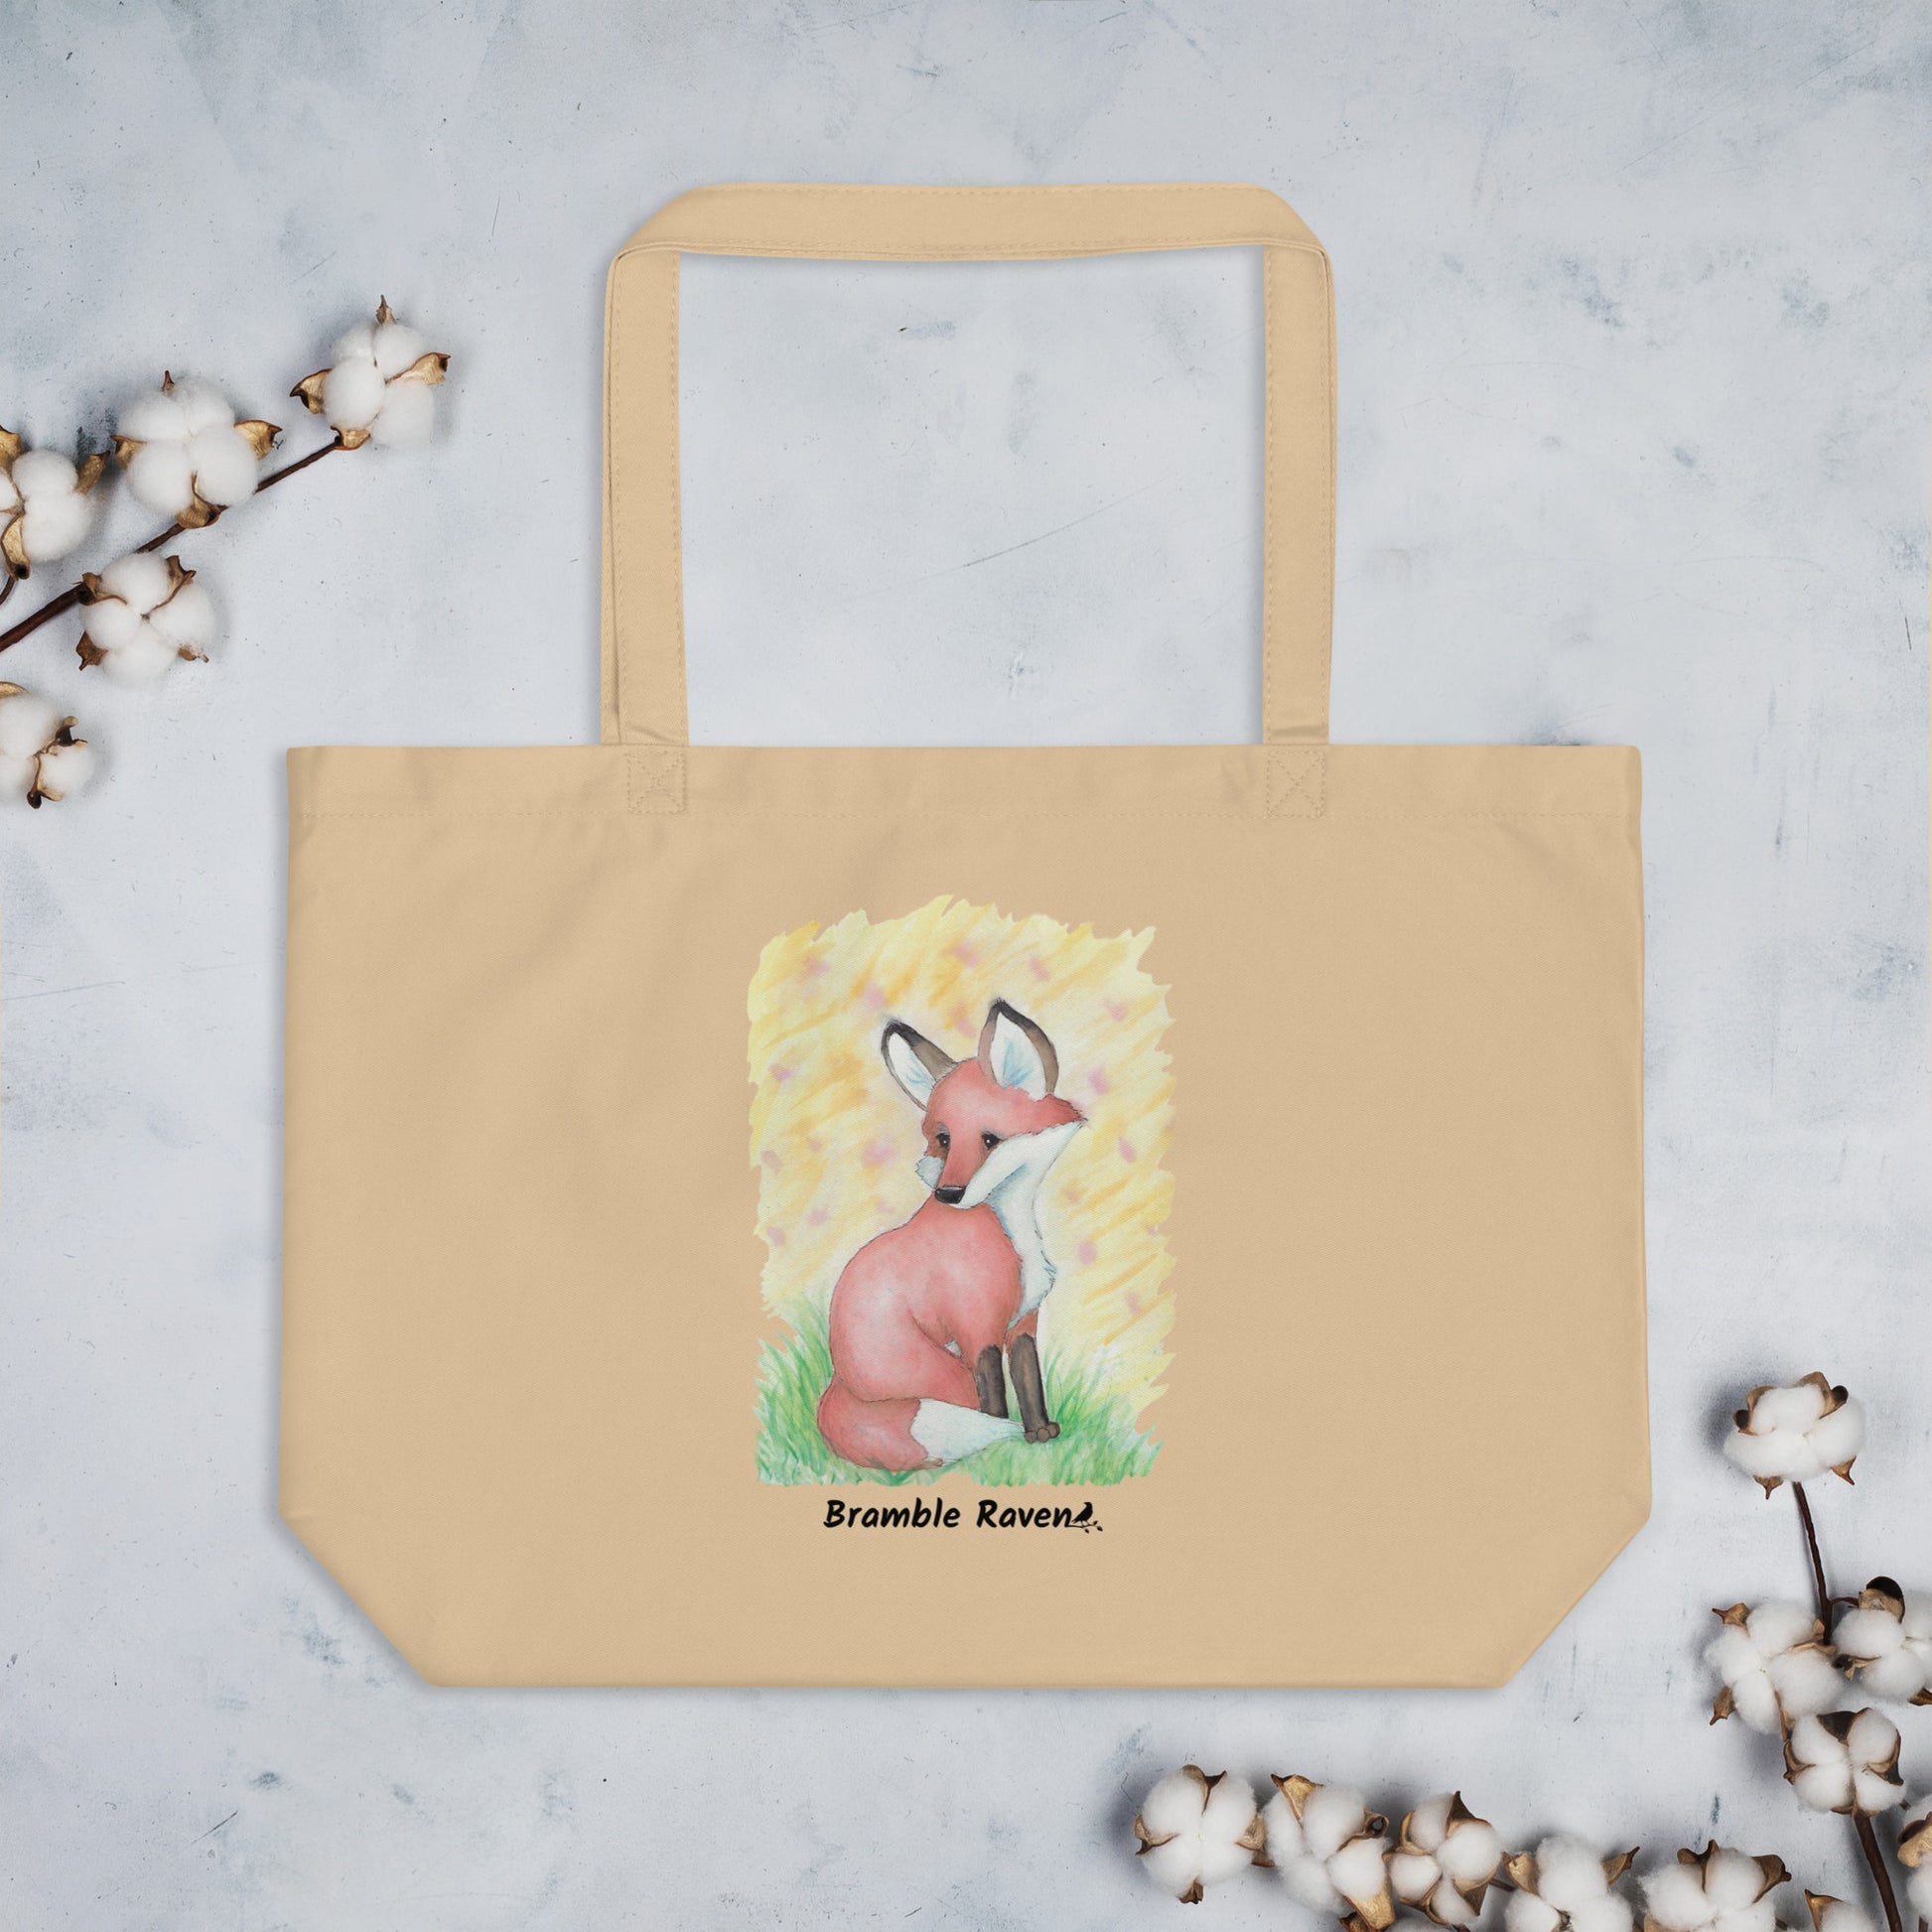 Original watercolor fox painting in the grass with yellow background. Printed on large oyster-colored eco tote. 20 by 14 by 5 inches. 100% recycled cotton. Shown on tabletop with cotton plant accents.